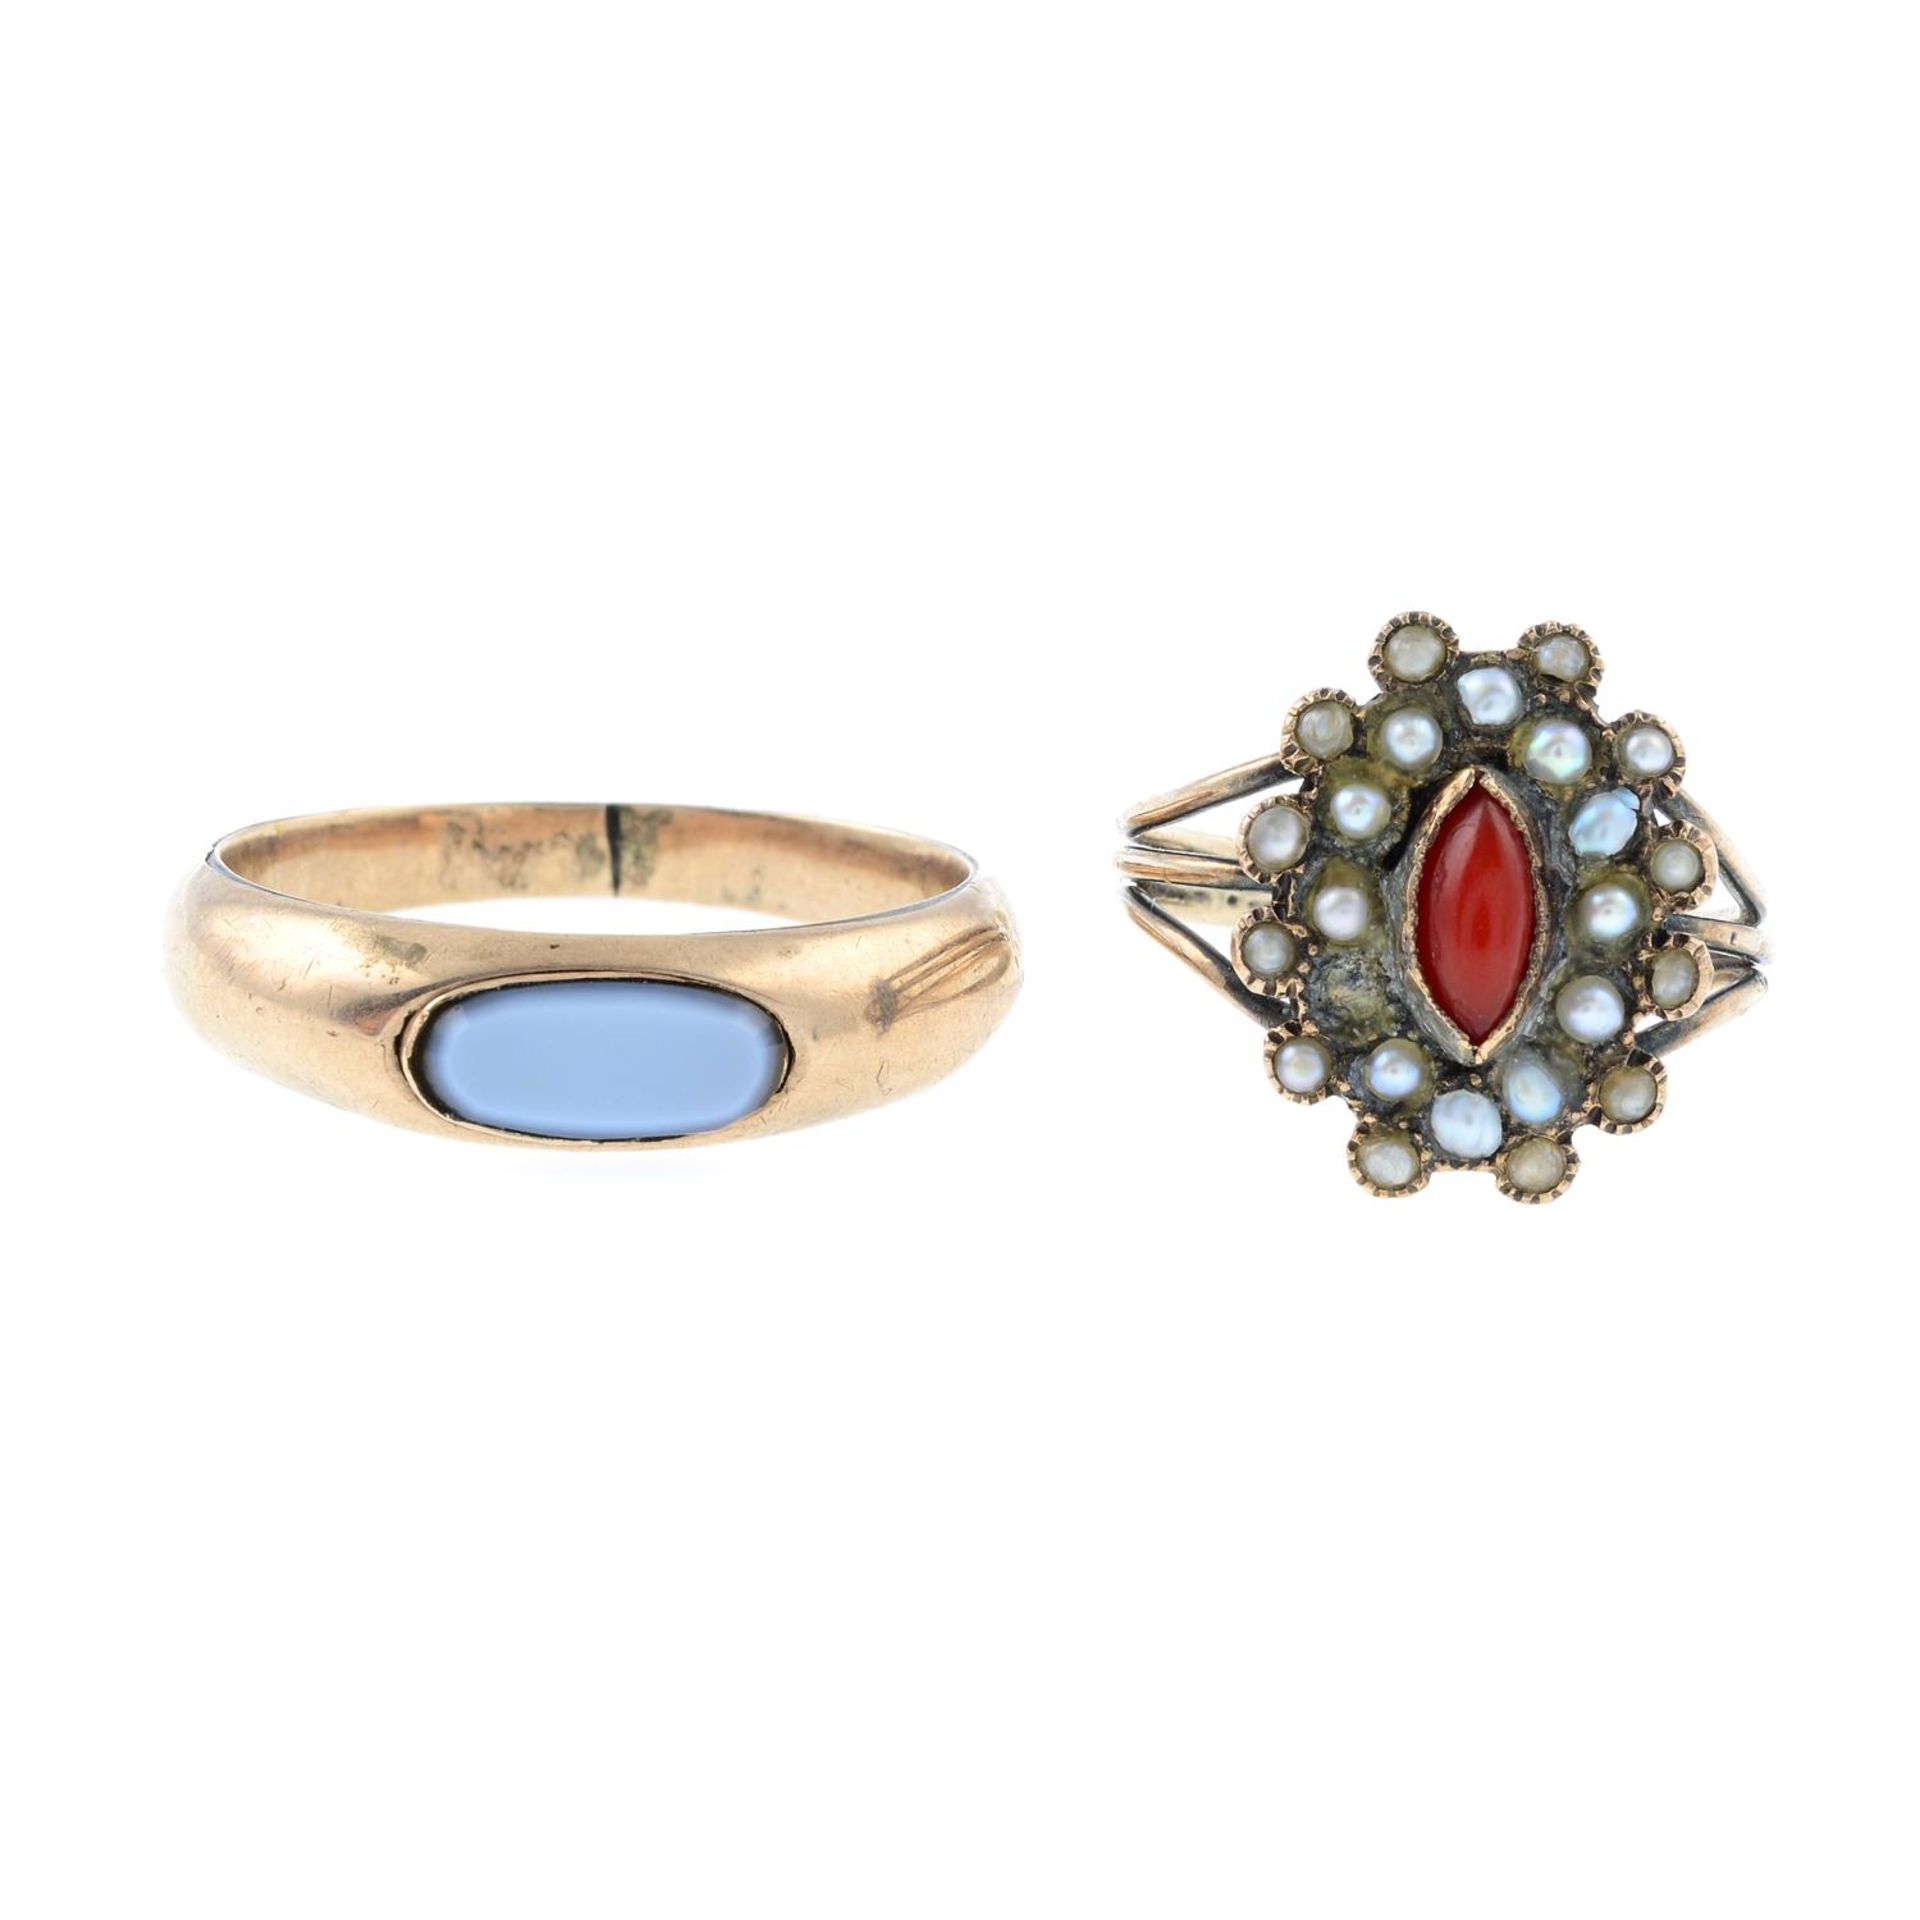 A mid 19th century split pearl and coral cluster ring, together with an early 20th century agate